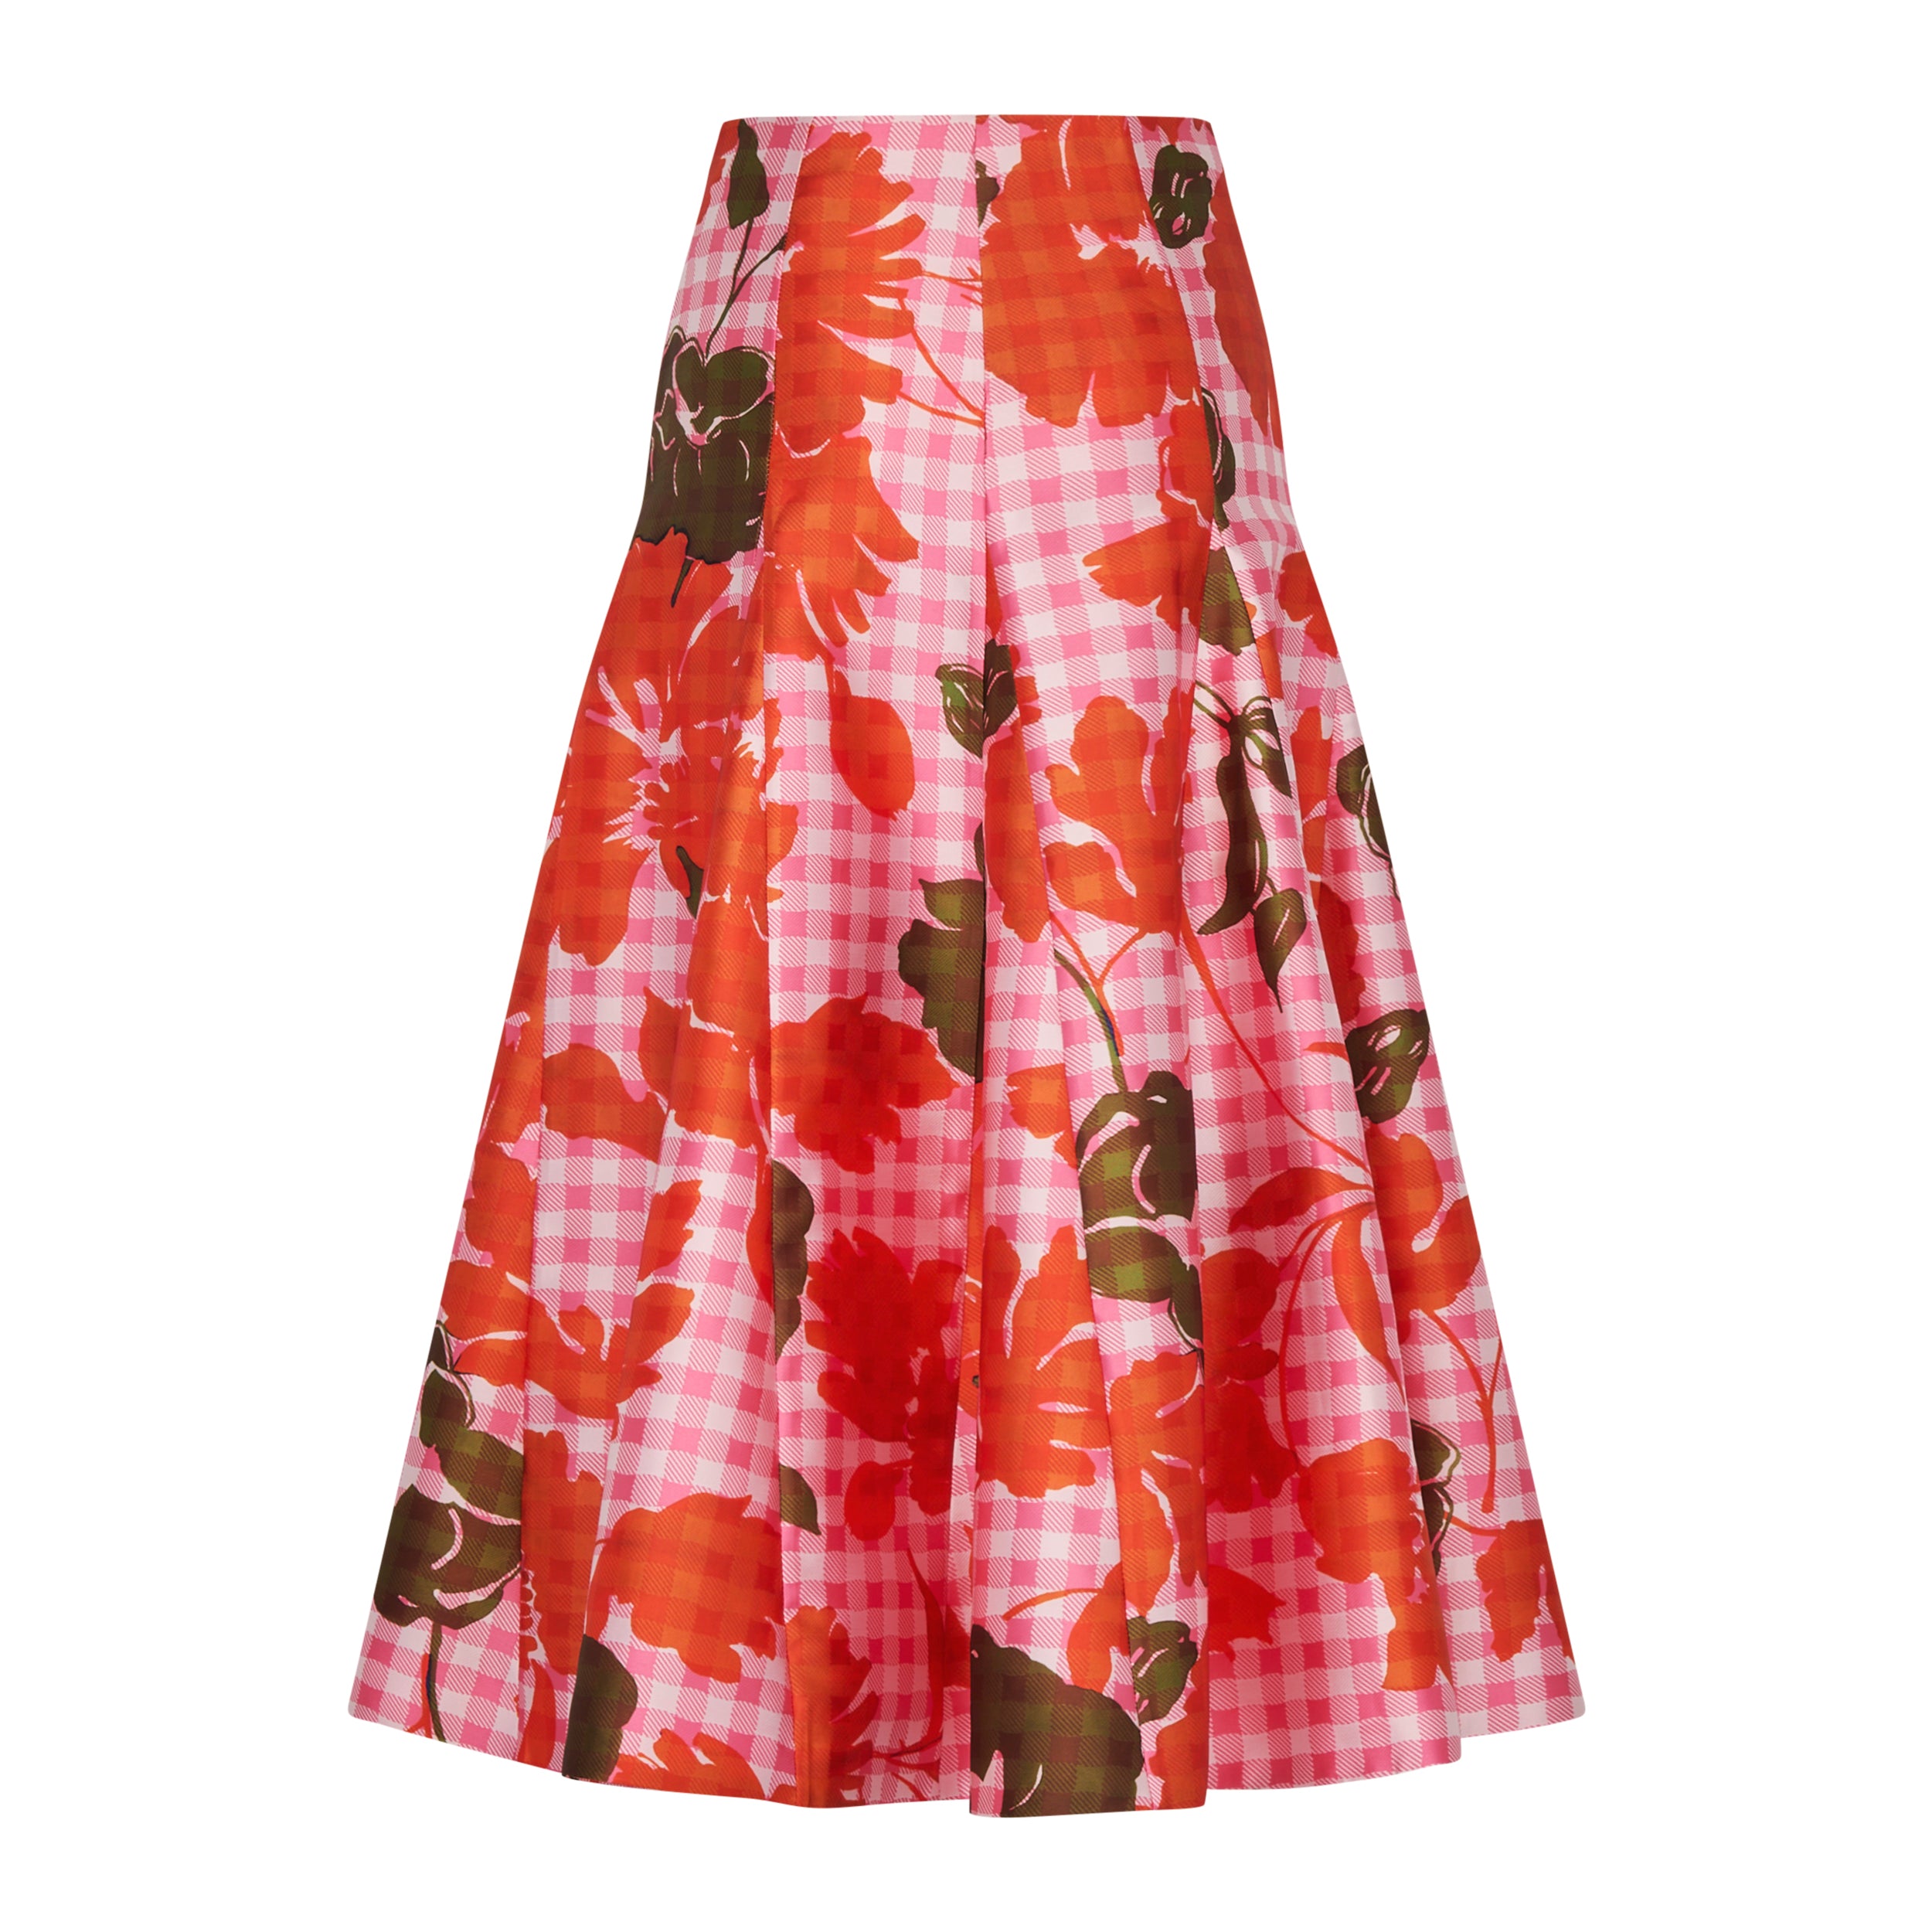 Maia Skirt in Floral Gingham Mikado